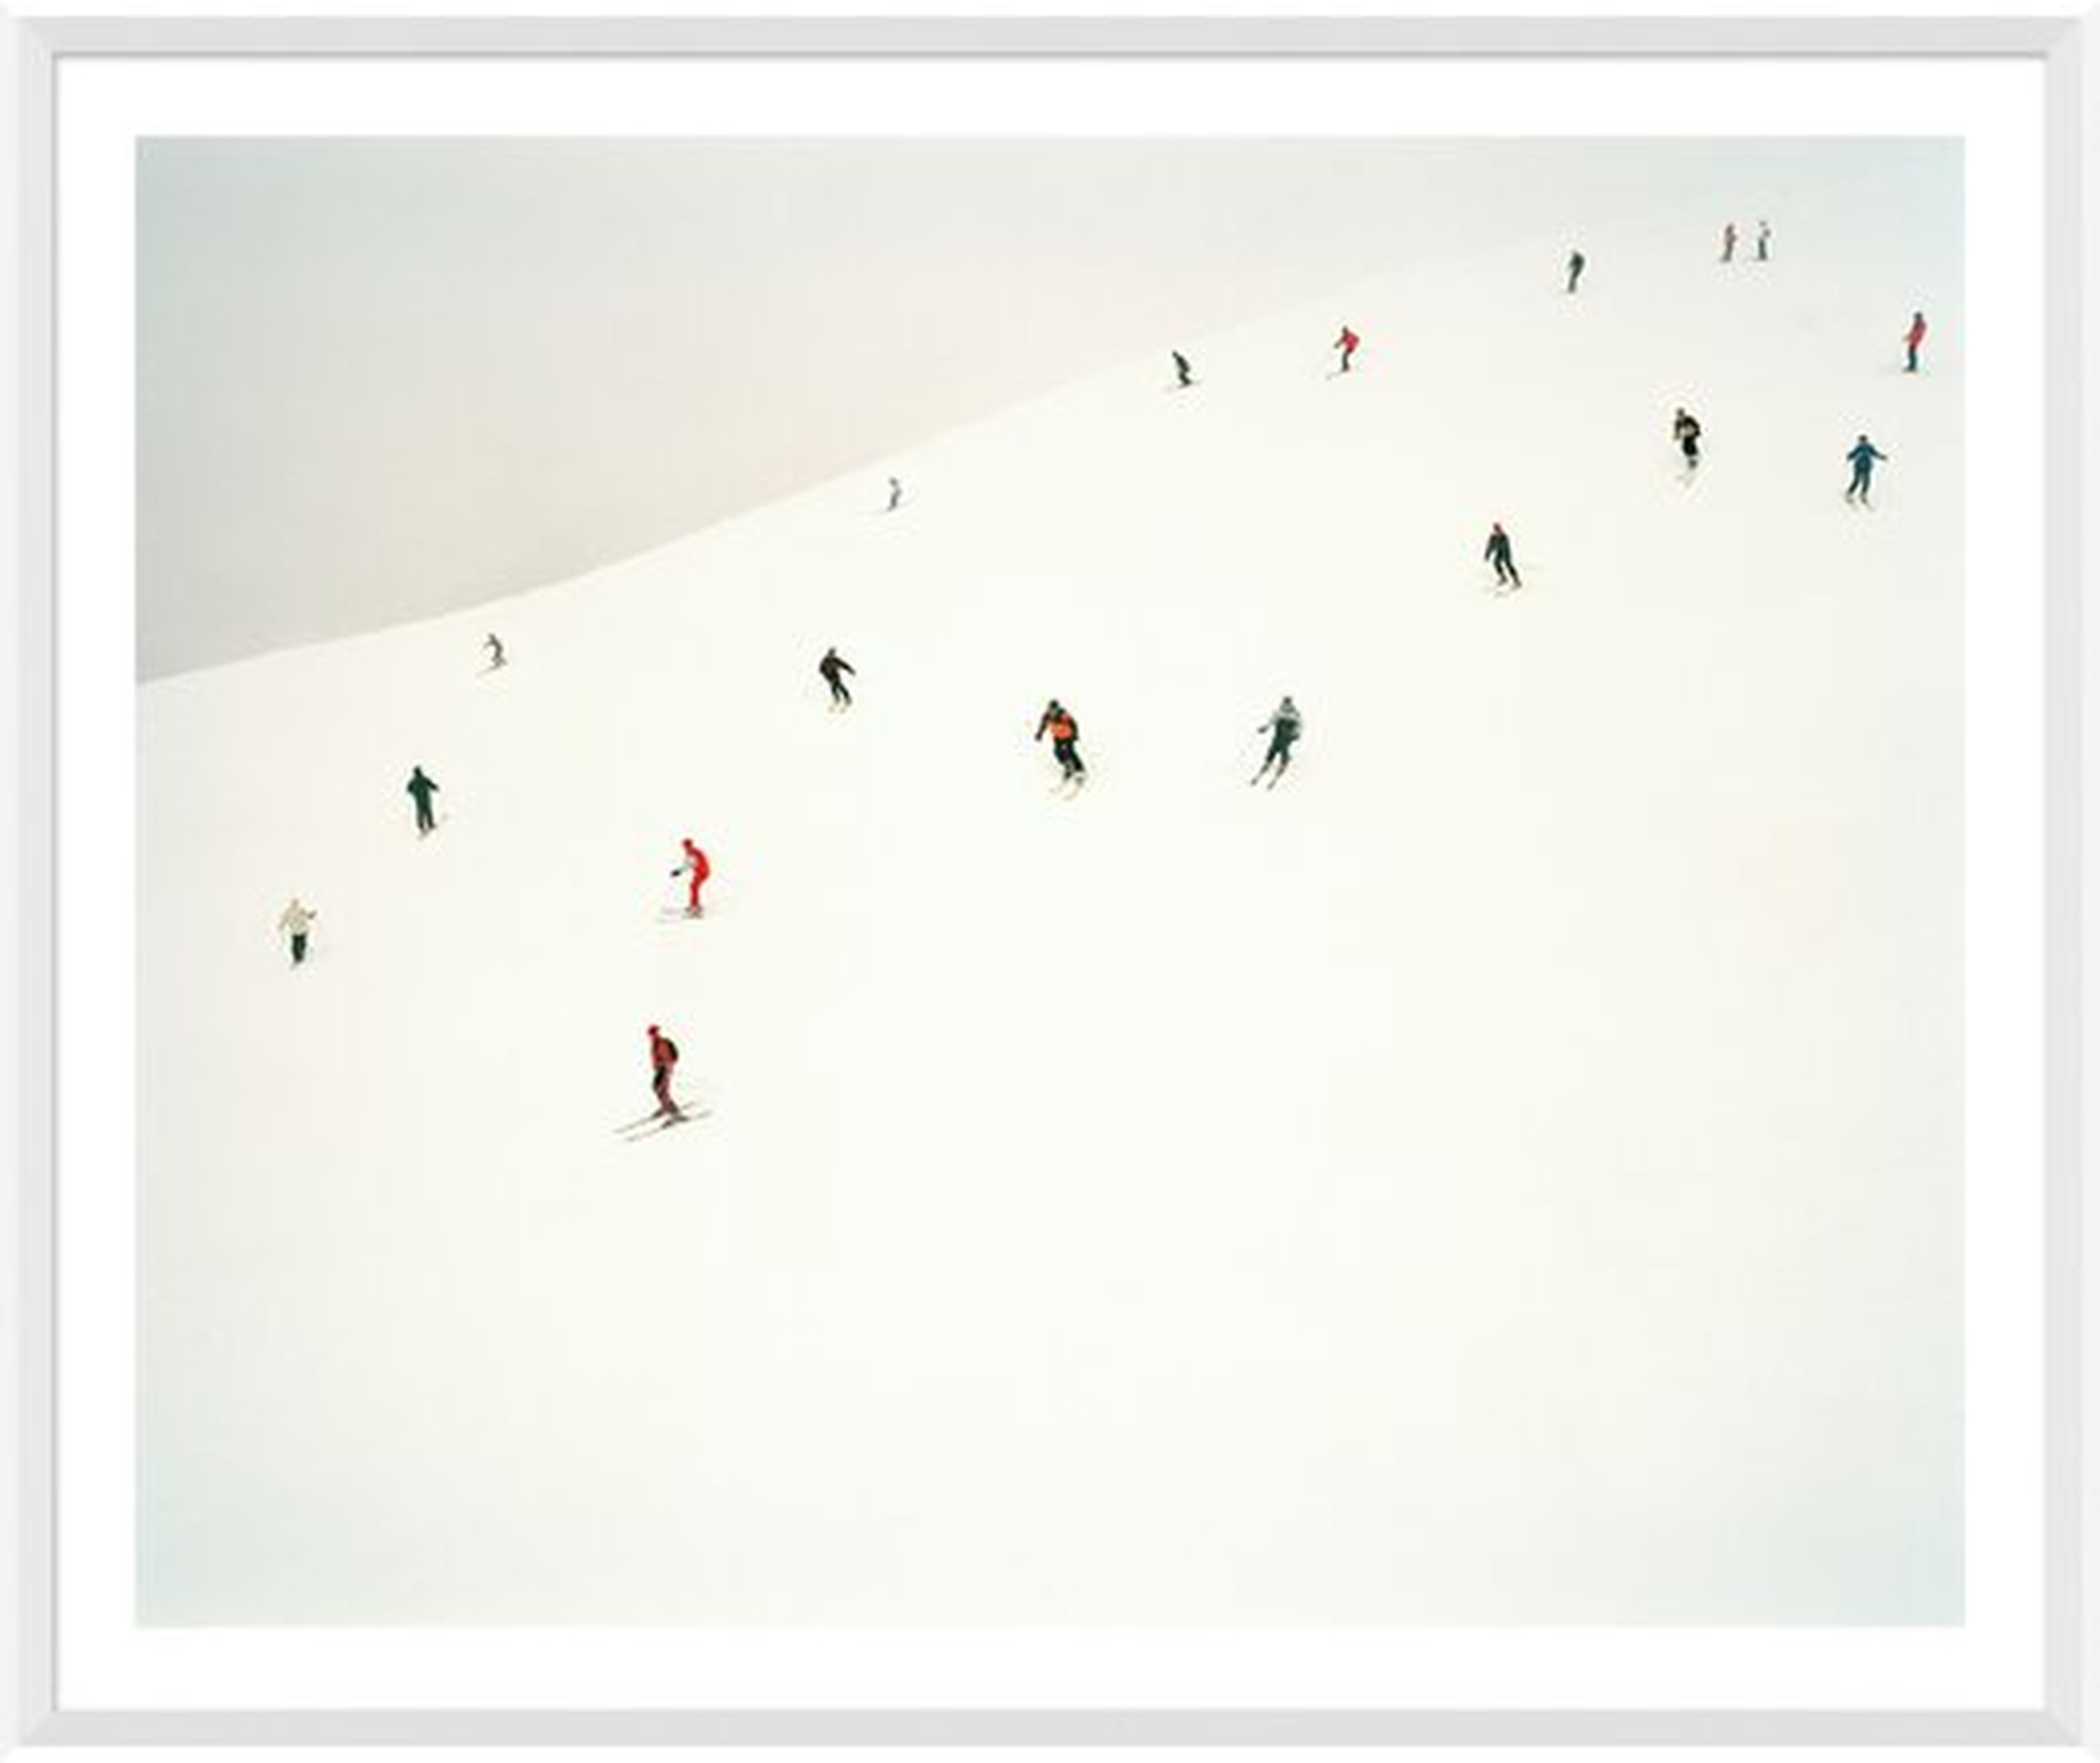 Photos by Getty Images 'Skiers on Slopes' by Gentty Images - Picture Frame Photograph Print on Paper - Perigold